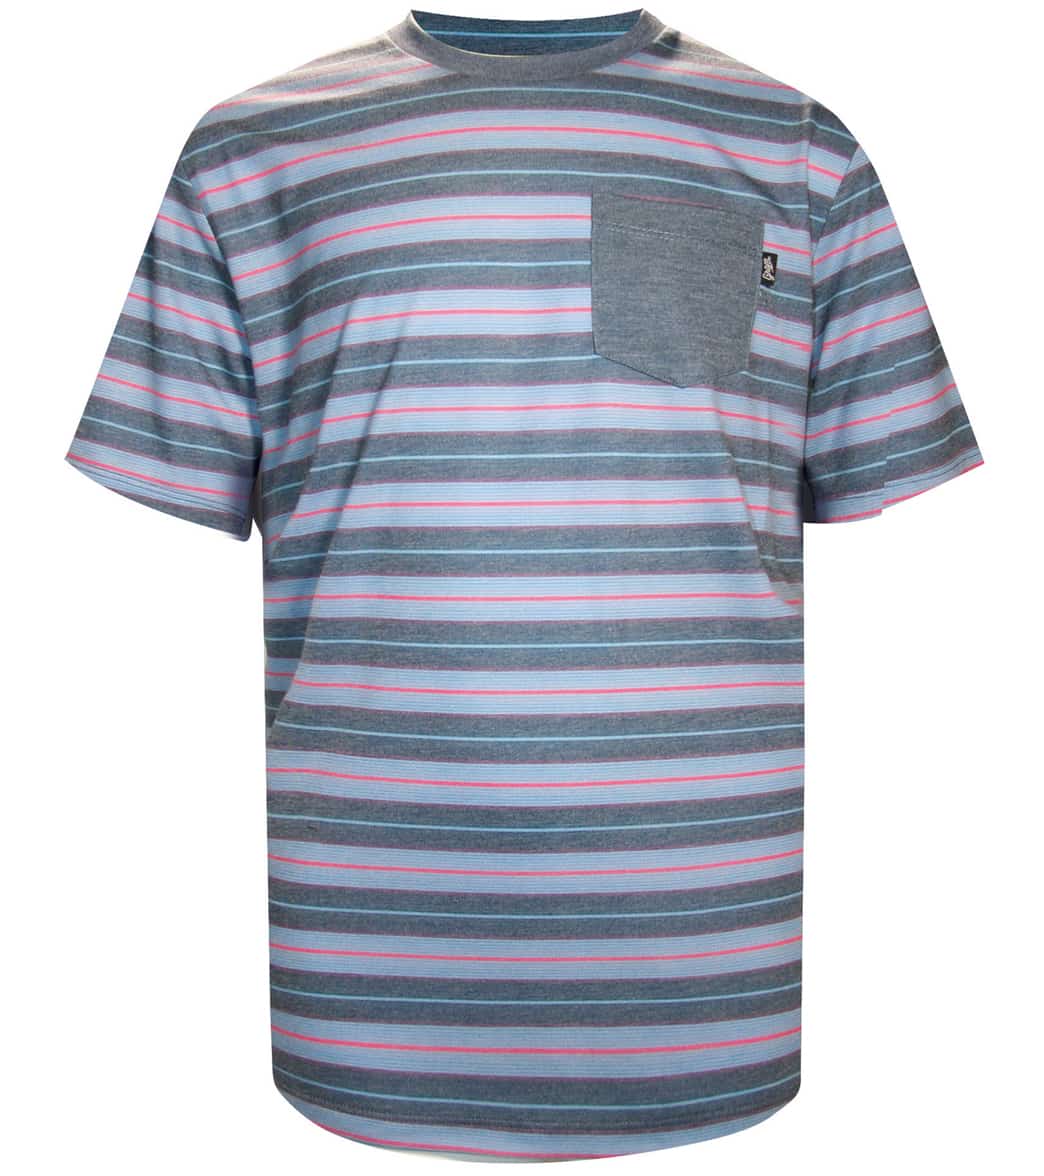 Grom Boys' Army Stripe Tee Shirt Toddler/Little/Big Kid - Navy Large 10/12 - Swimoutlet.com